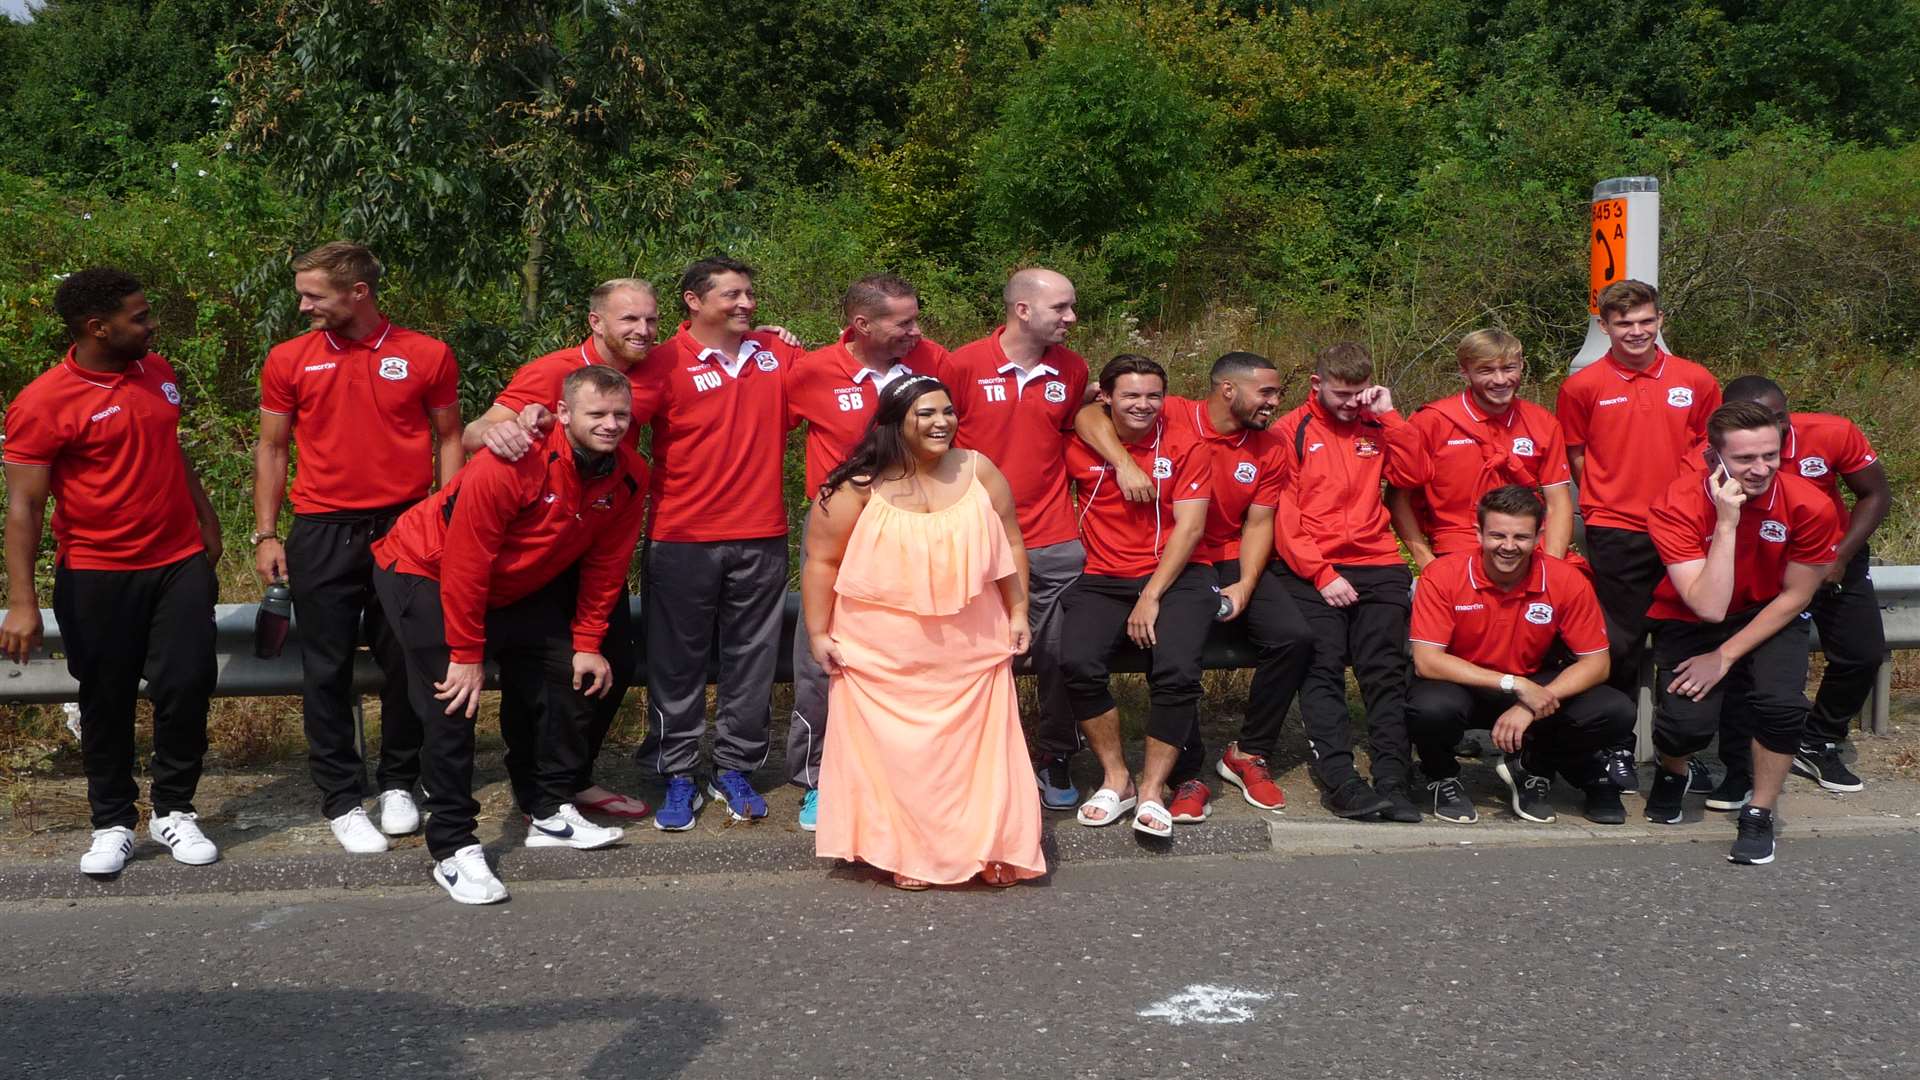 Bride-to-be Lisa Cobbold poses with the players. Picture: Needham Market FC